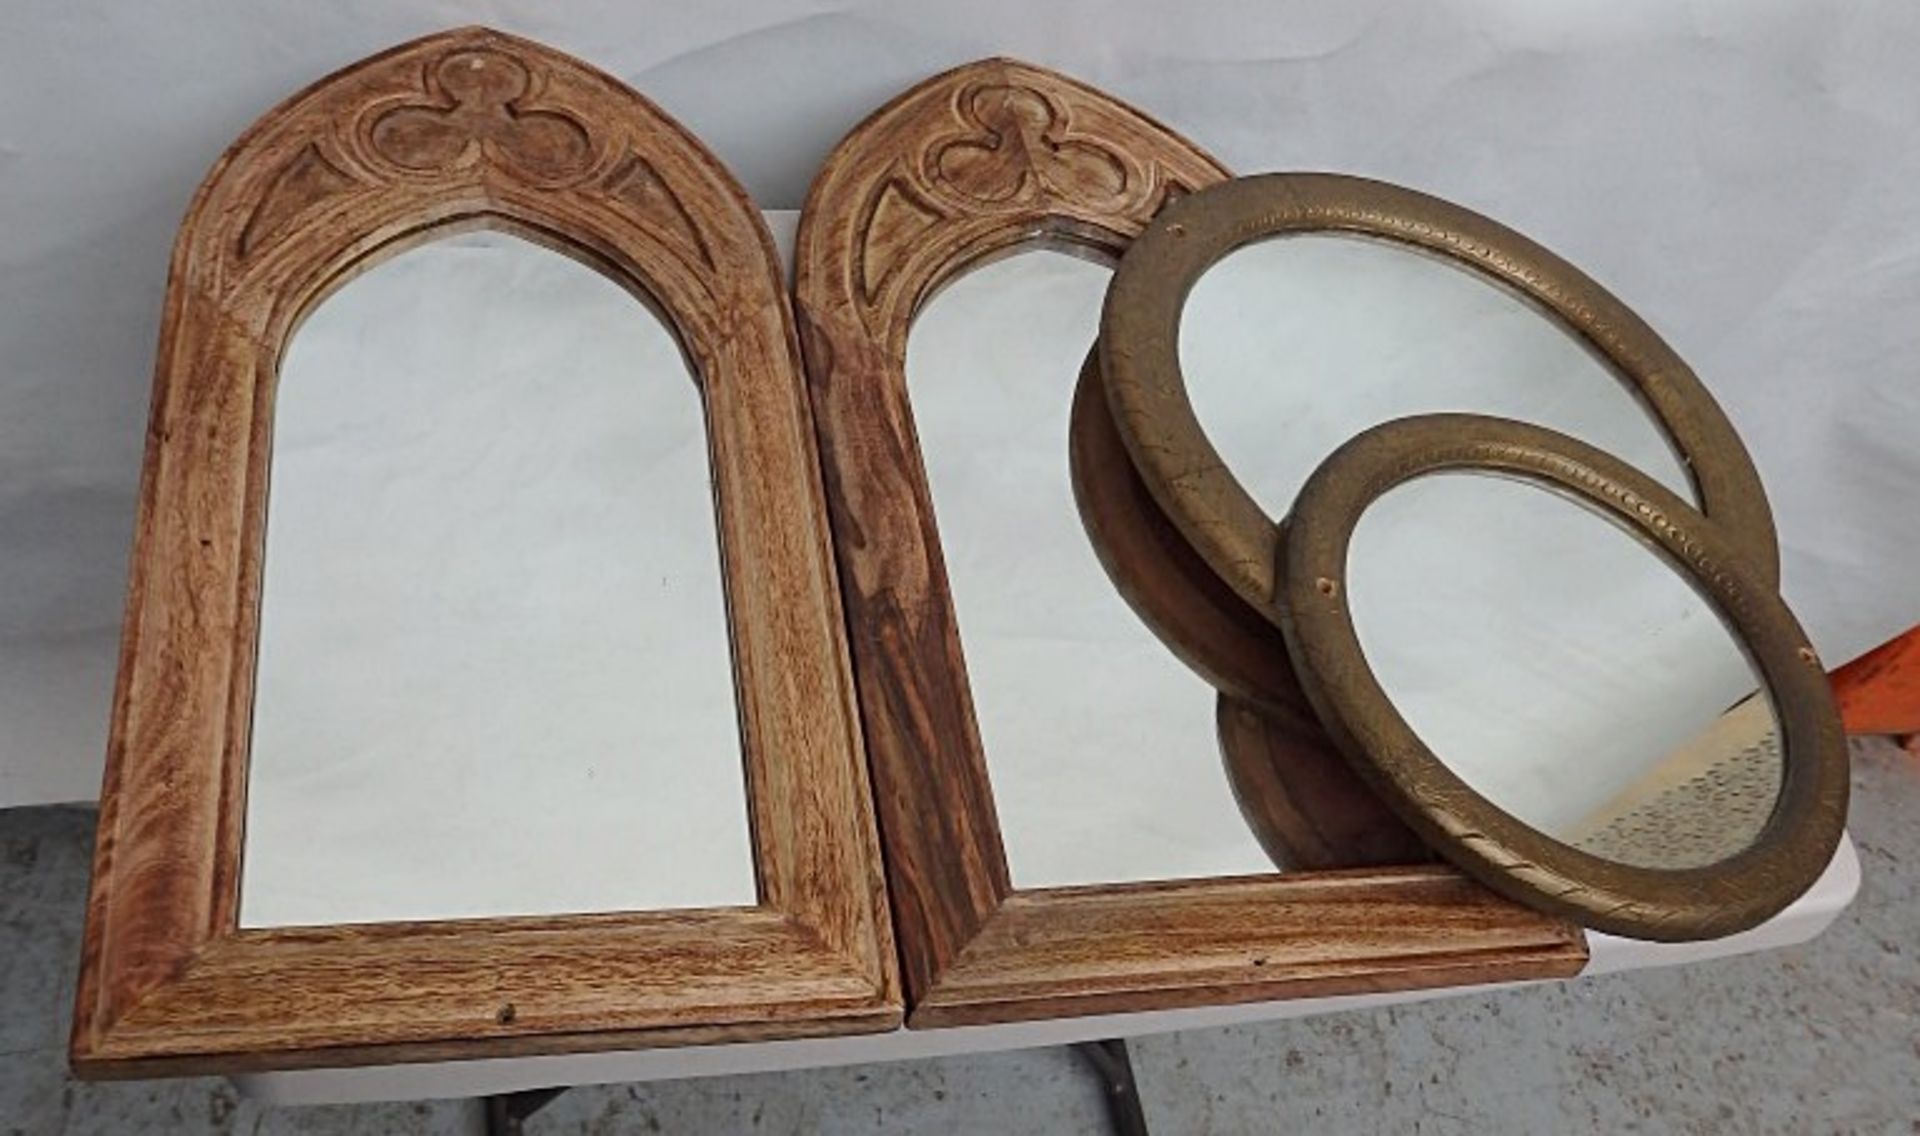 4 x Assorted Gothic Style Framed Mirrors - Features 2 x Arched & 2 Round Designs - Ref: HOT040 -